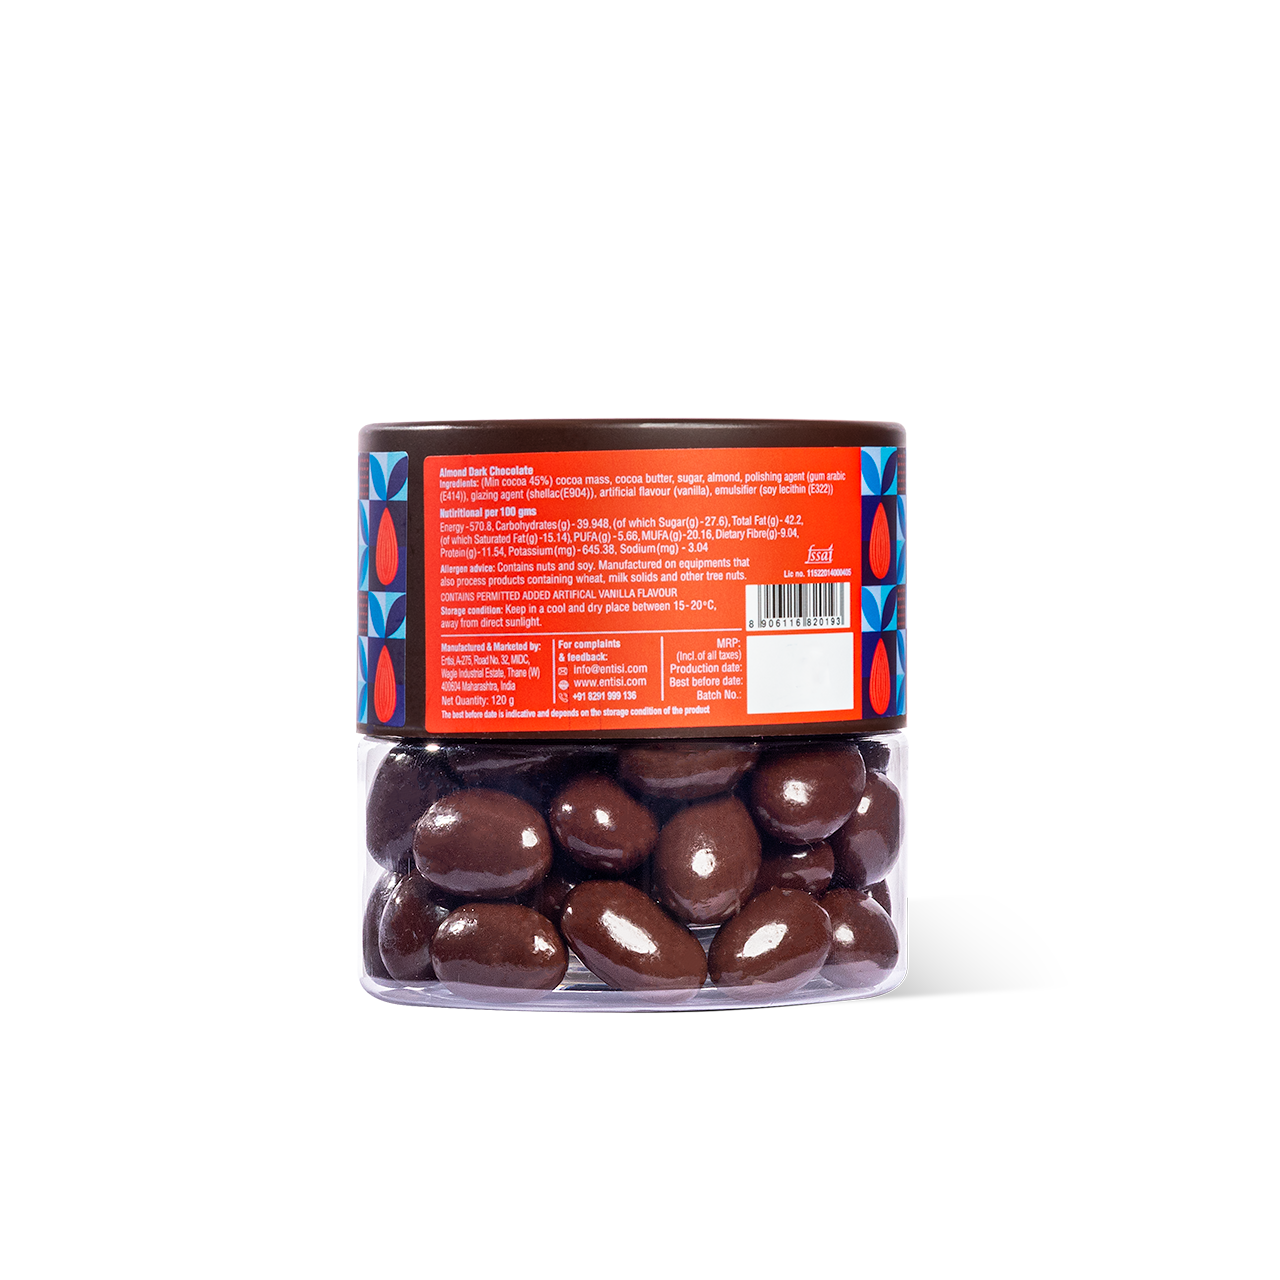 Entisi - Chocolate coated Almond Dragees Jar